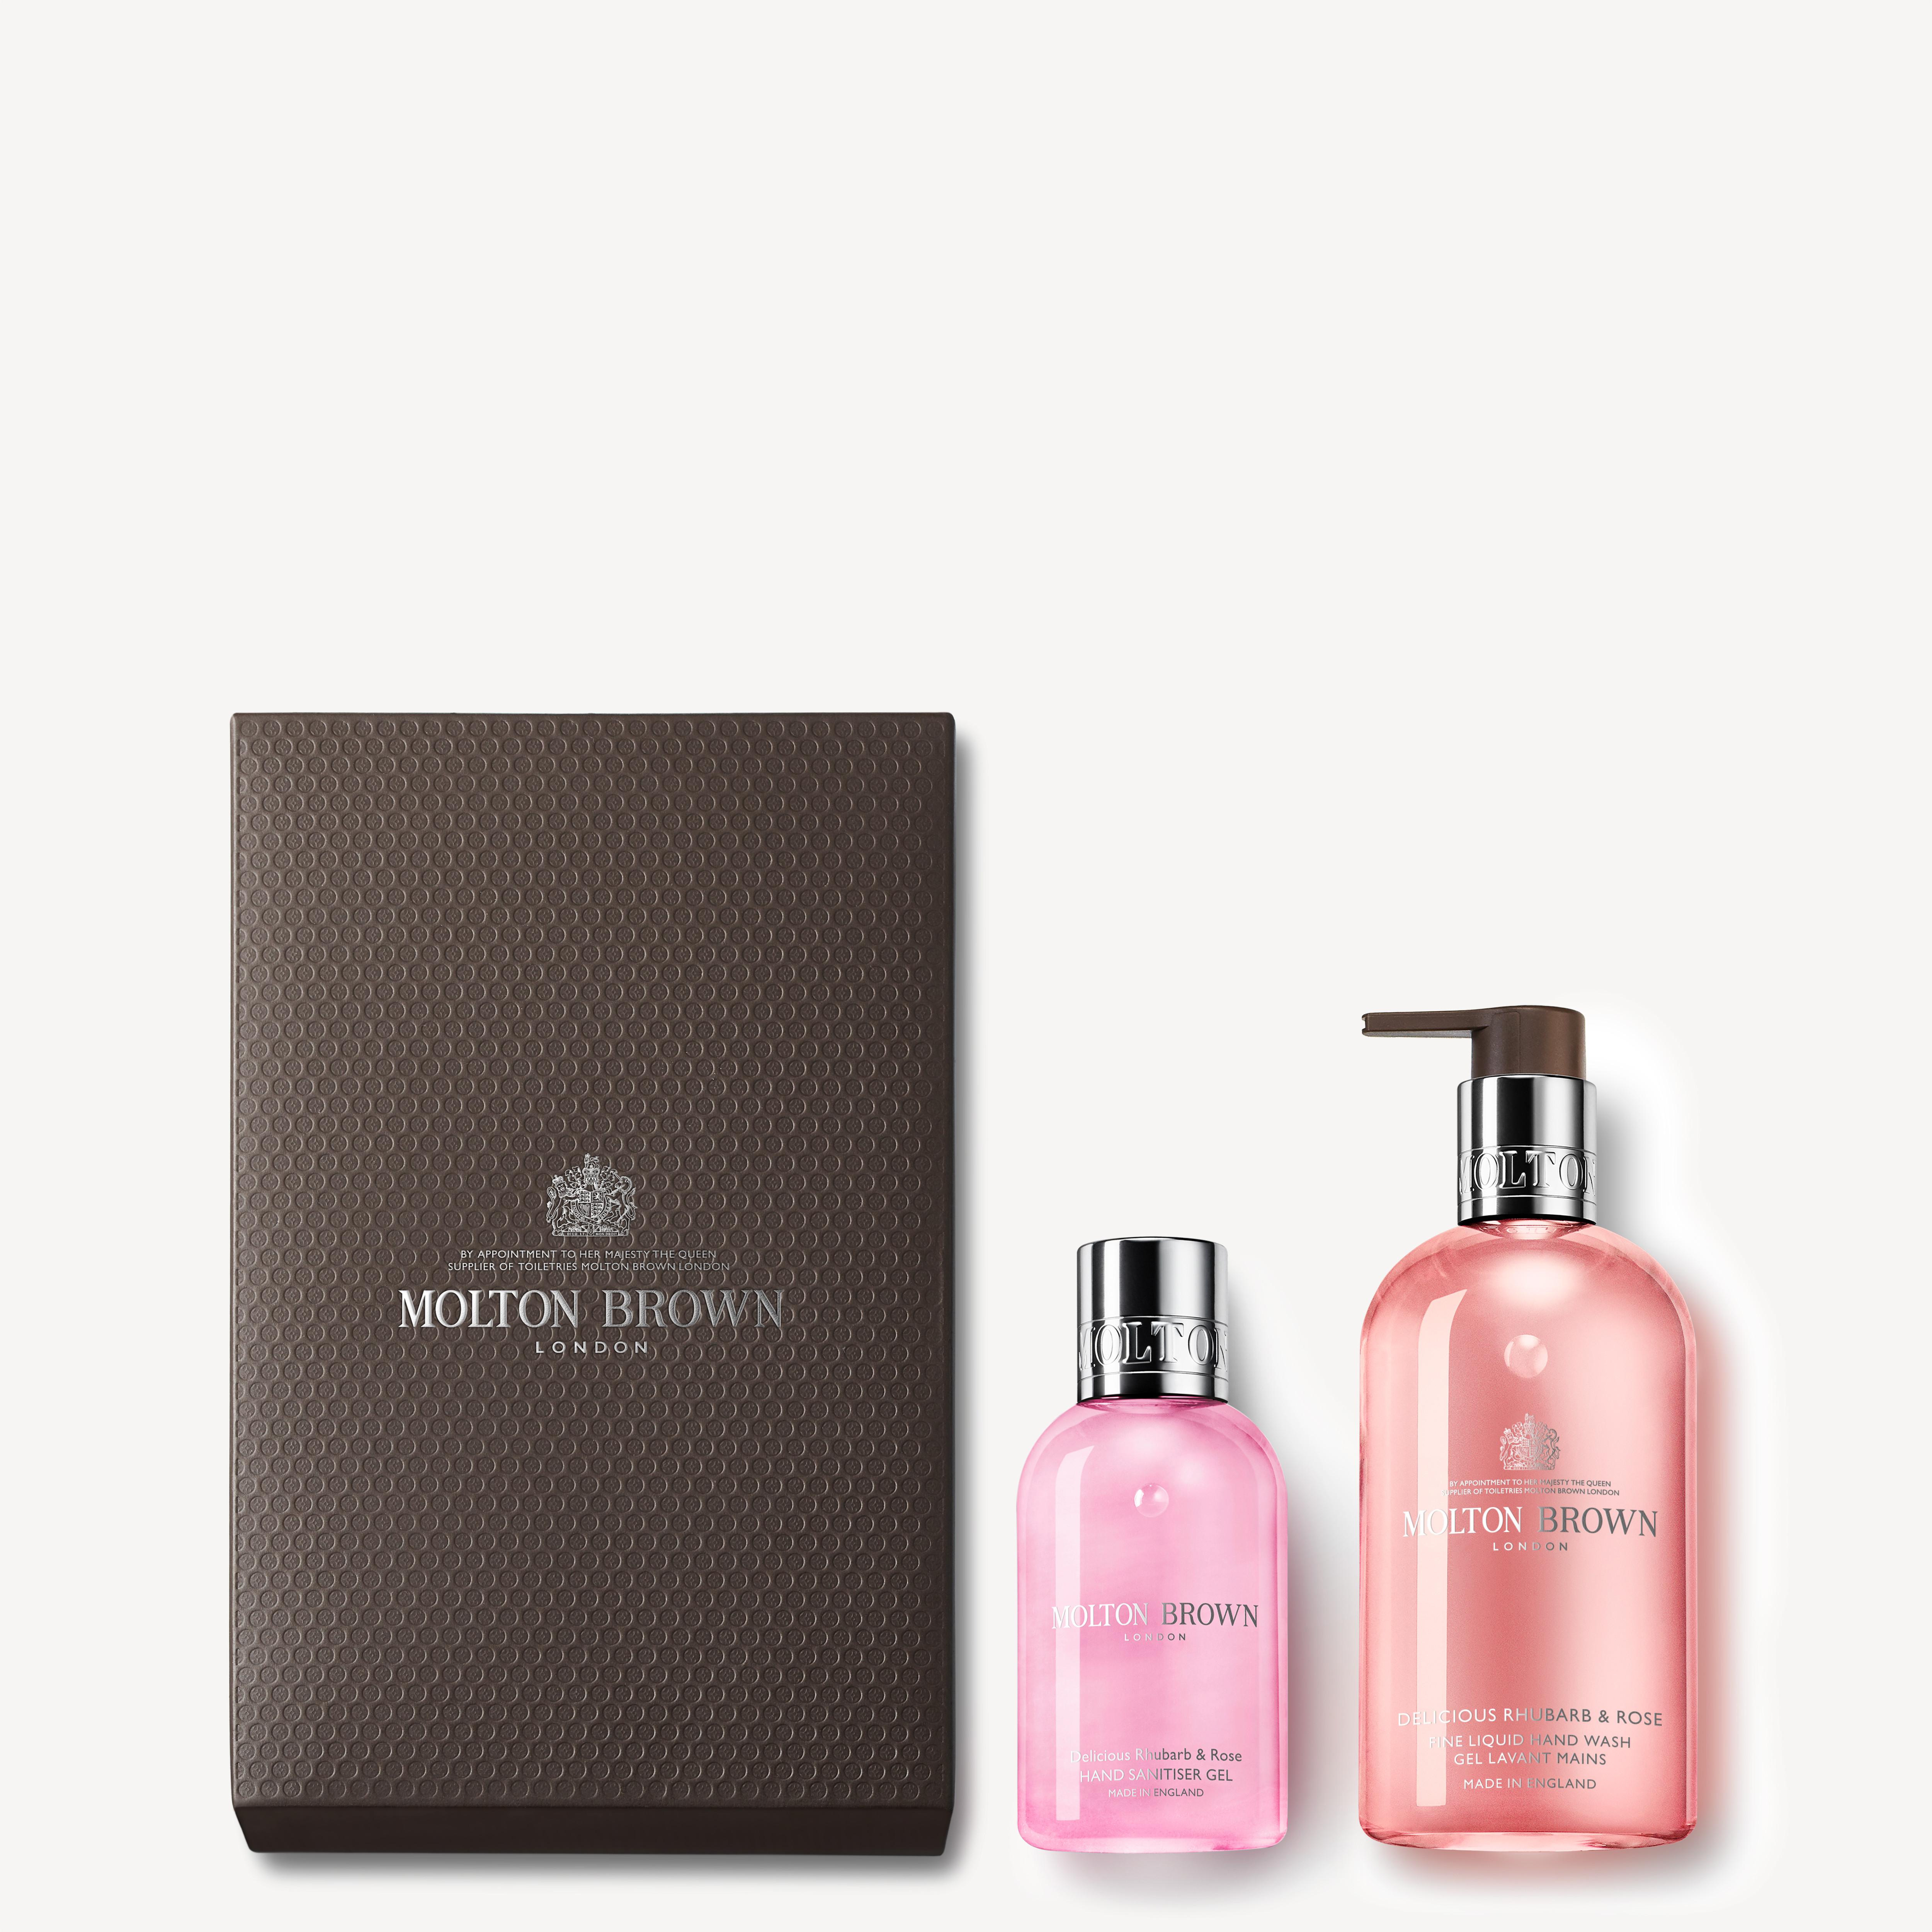 Molton Brown Delicious Rhubarb & Rose On-the-go Hand Sanitiser Gel and Wash Gift Set